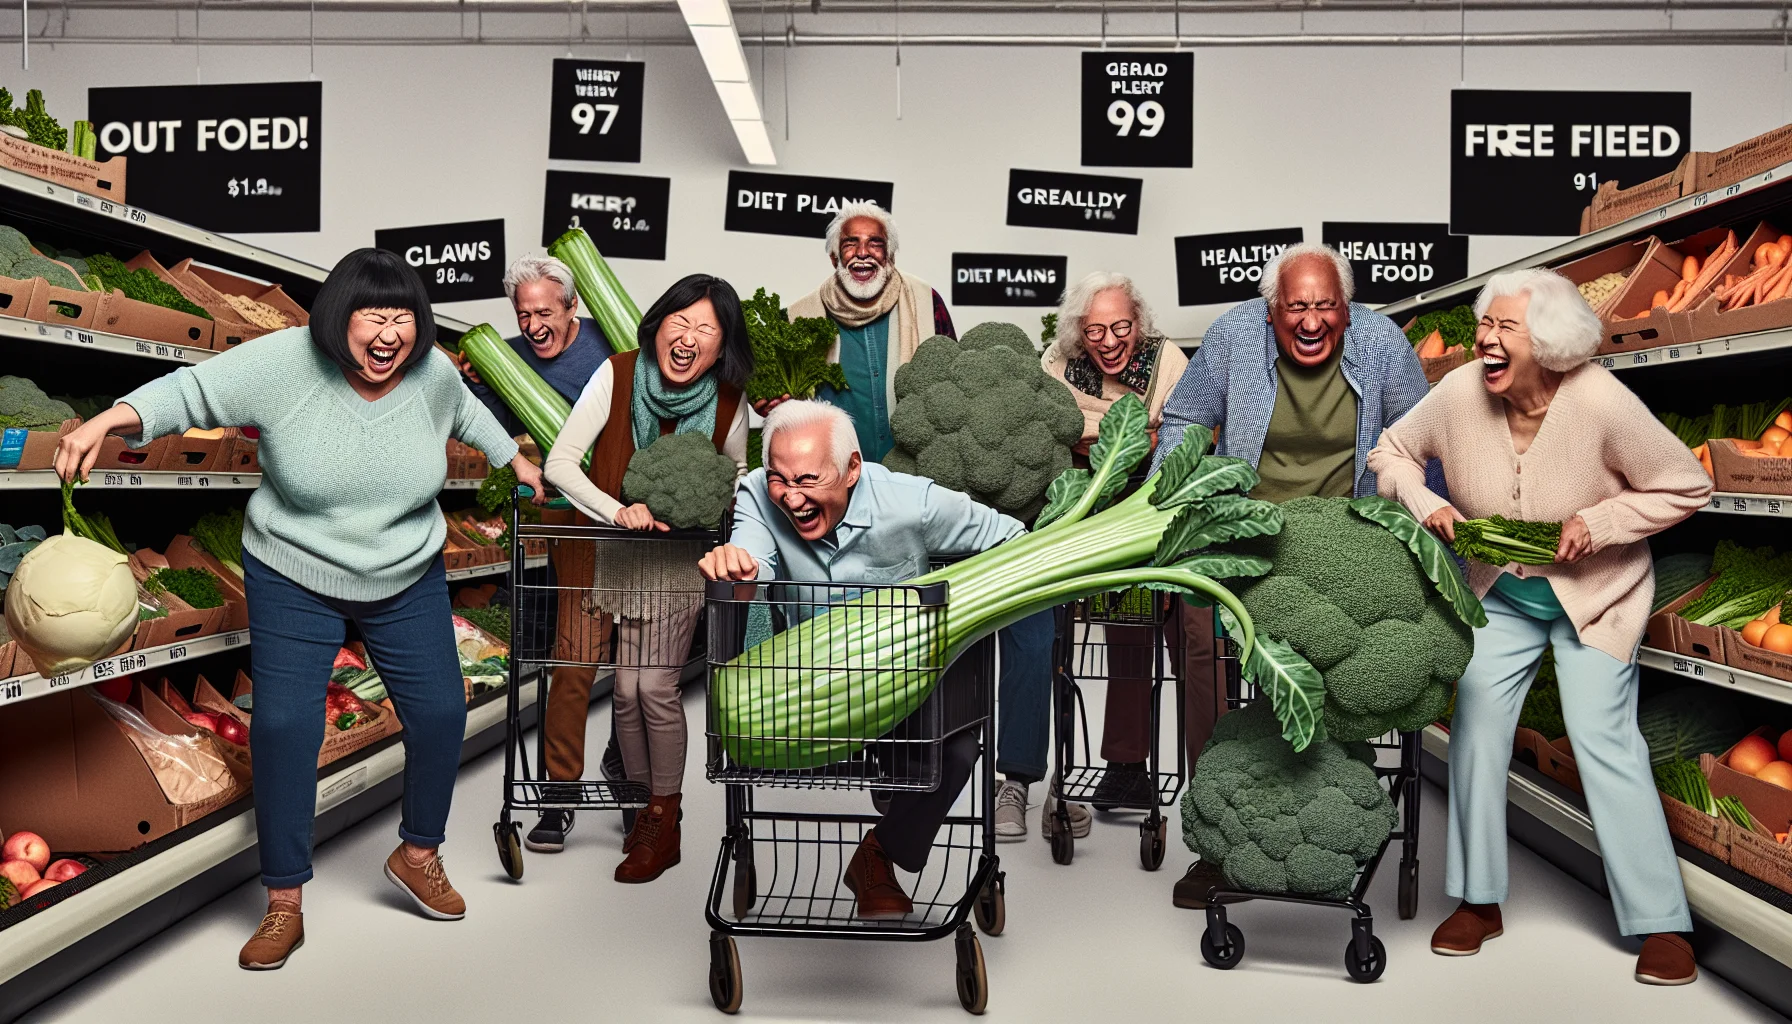 Generate a humorous, realistic image showing a diverse group of senior citizens at the free grocery store. Each individual is Caucasian, Black, Asian and Hispanic, both genders are present. They're all laughing and struggling to navigate the aisles laden with healthy food products. In one corner, a Middle-Eastern woman is having an amusing duel with a gigantic celery stick. In another, a Caucasian man chuckles as he attempts to balance a stack of kale on his walker. In the background, an Asian woman and a Black man are laughing while comparing sizes of broccoli heads. Add some nearby signs that suggest diet plans and health tips.